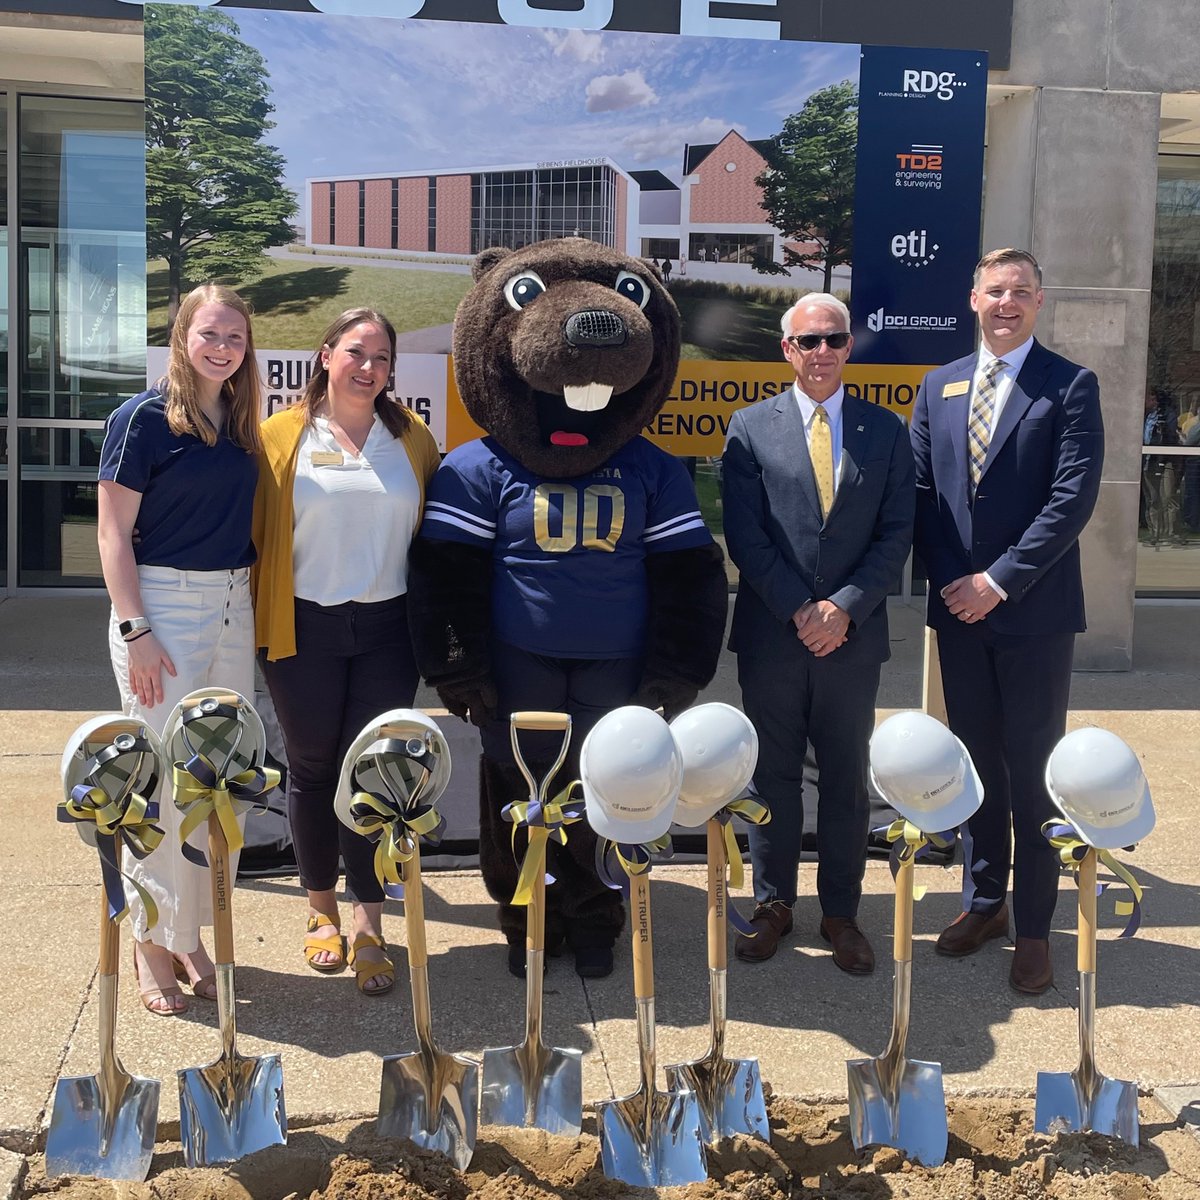 The Beavers community came together to celebrate a monumental moment as we broke ground on the new 7,500-square-foot addition to Siebens Fieldhouse! This marks the beginning of an exciting new chapter for @BVUAthletics! 

#BeaversBuild #Groundbreaking #GoBeavers